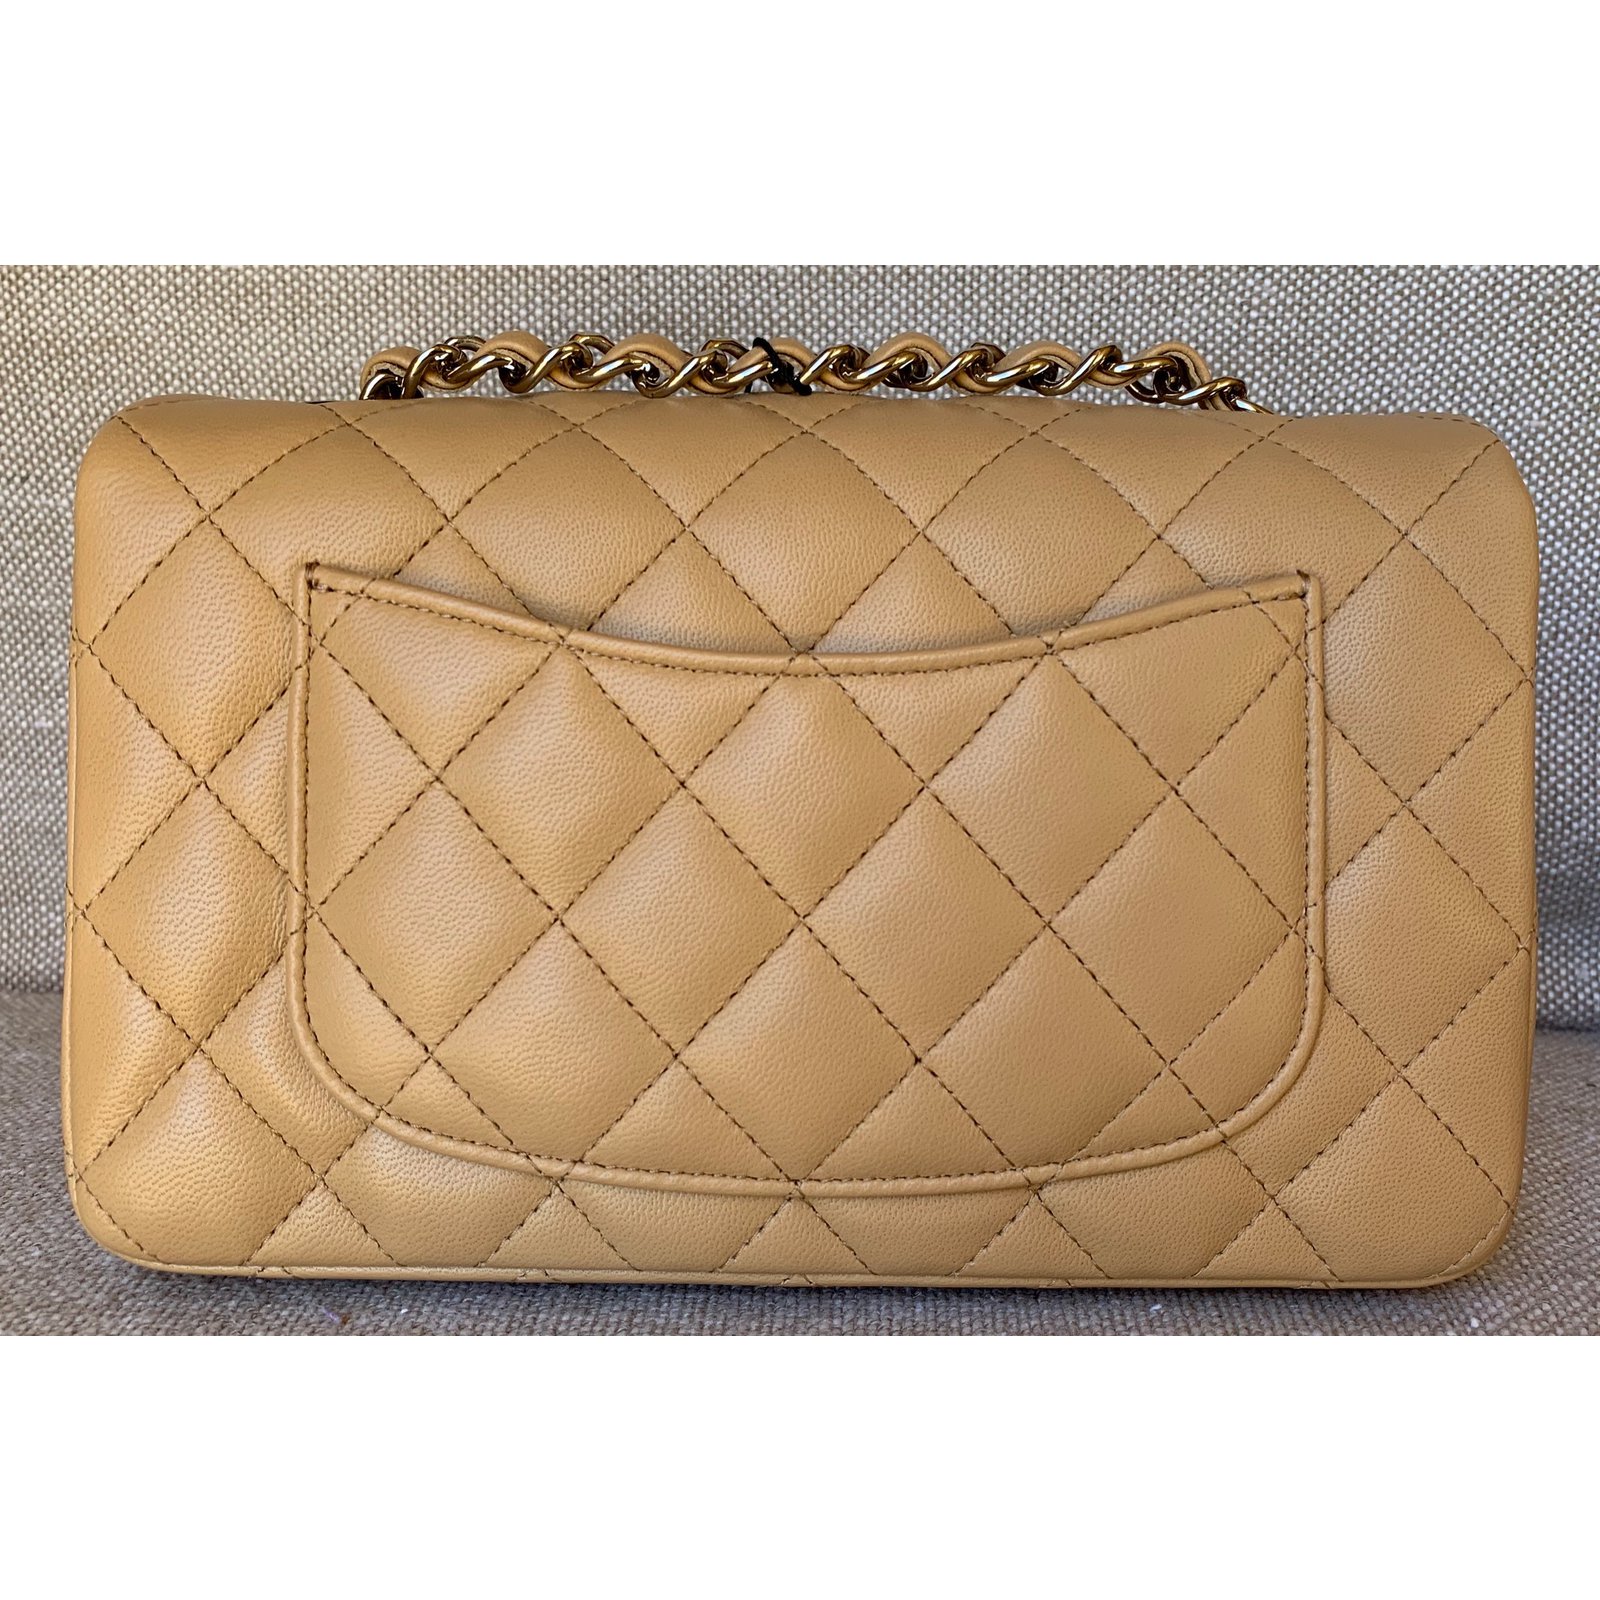 New and Gently Used Chanel Bags, Accessories & Clothing – Page 6 – VSP  Consignment